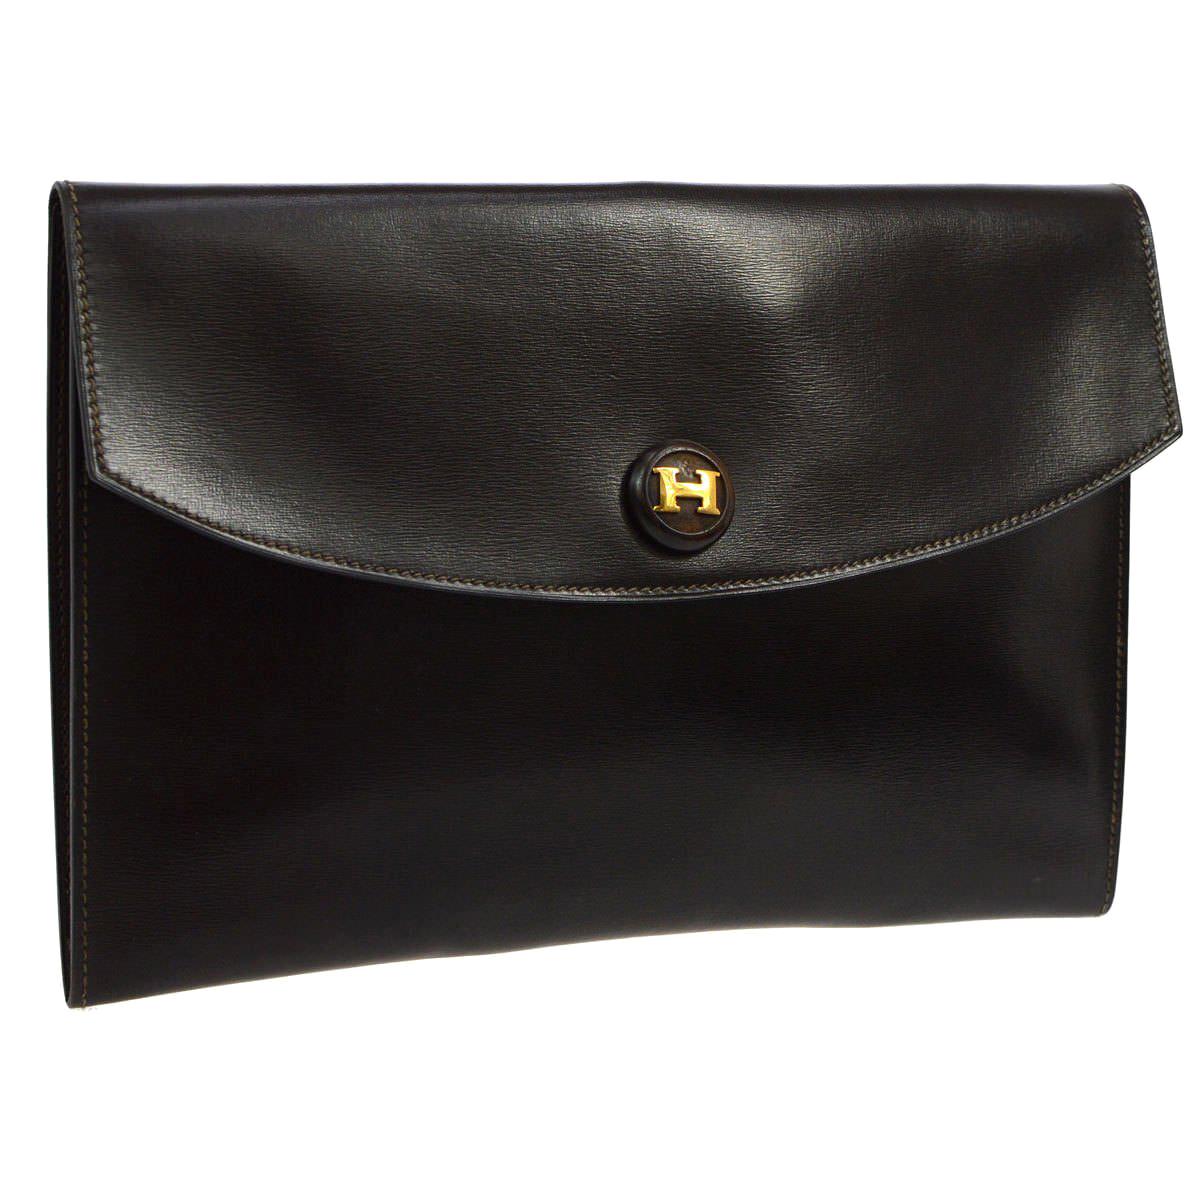 Hermes Chocolate Brown 'H' Charm Leather Evening Envelope Clutch Flap Bag